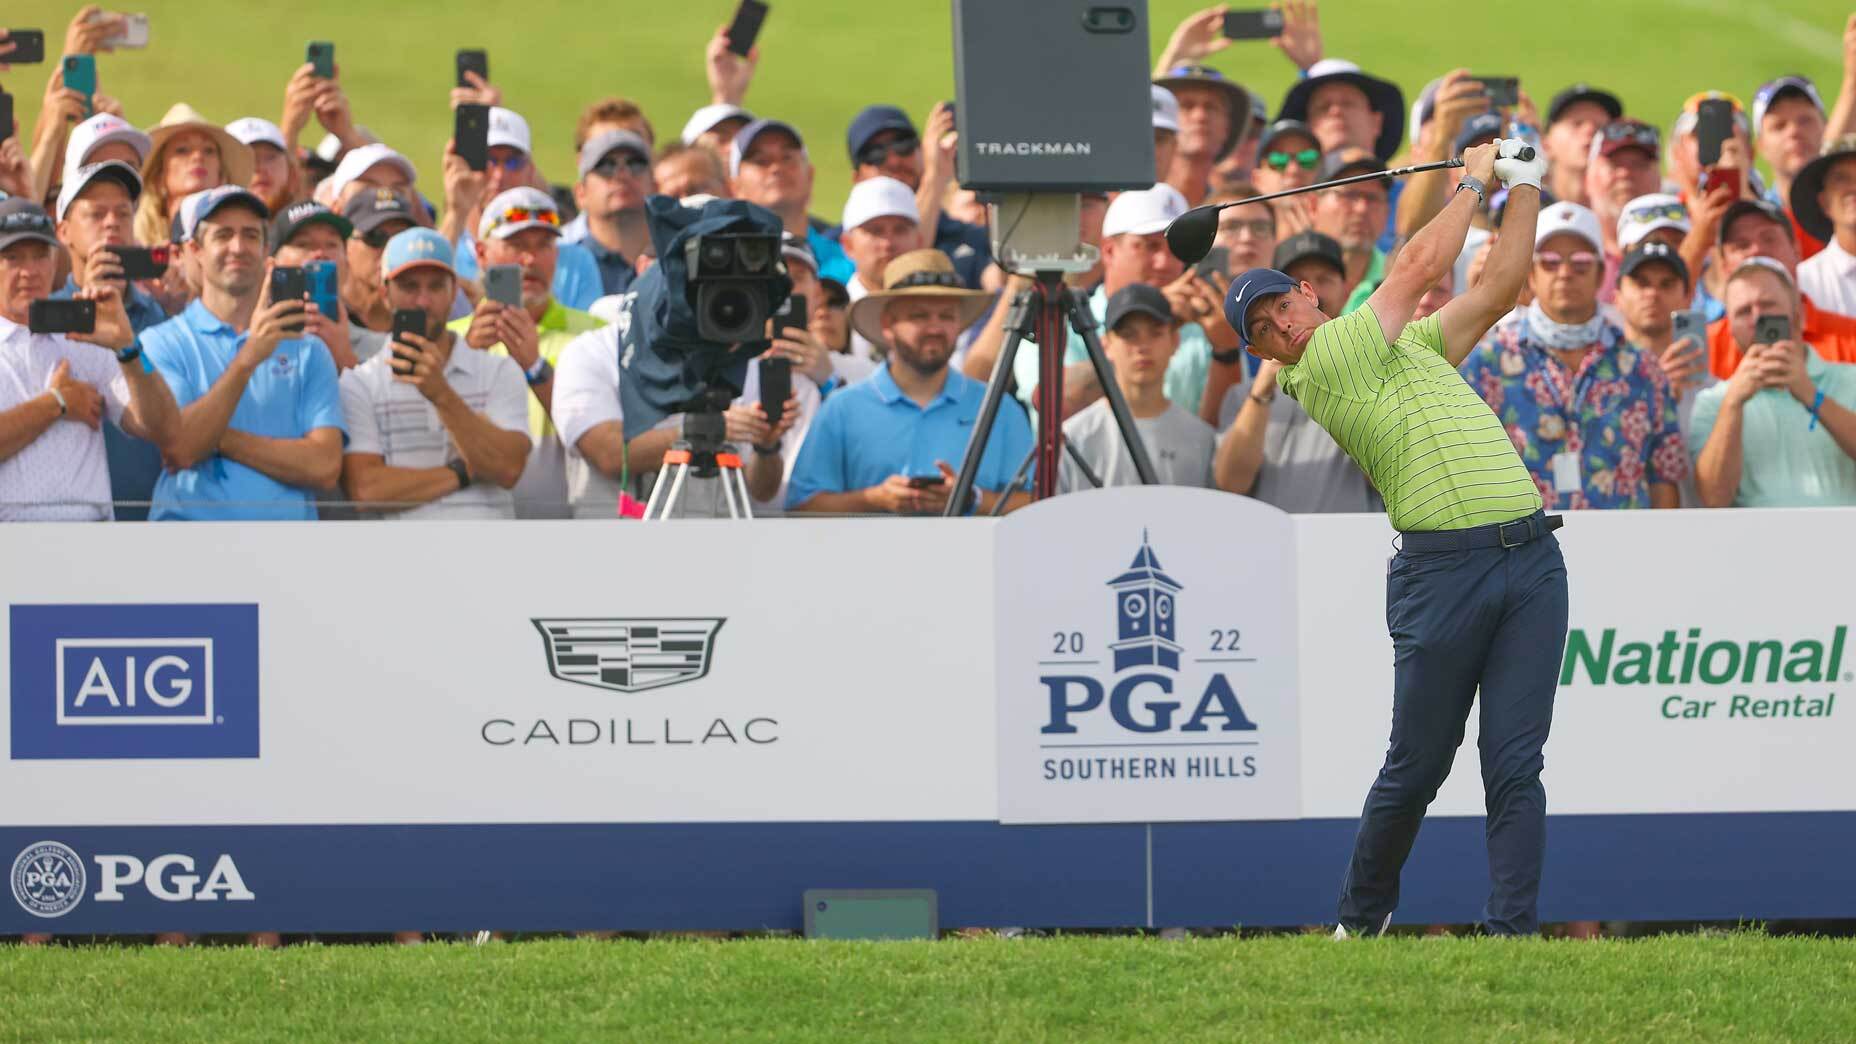 Follow Tiger Woods, Jordan Spieth and Rory McIlroy at the PGA Live blog